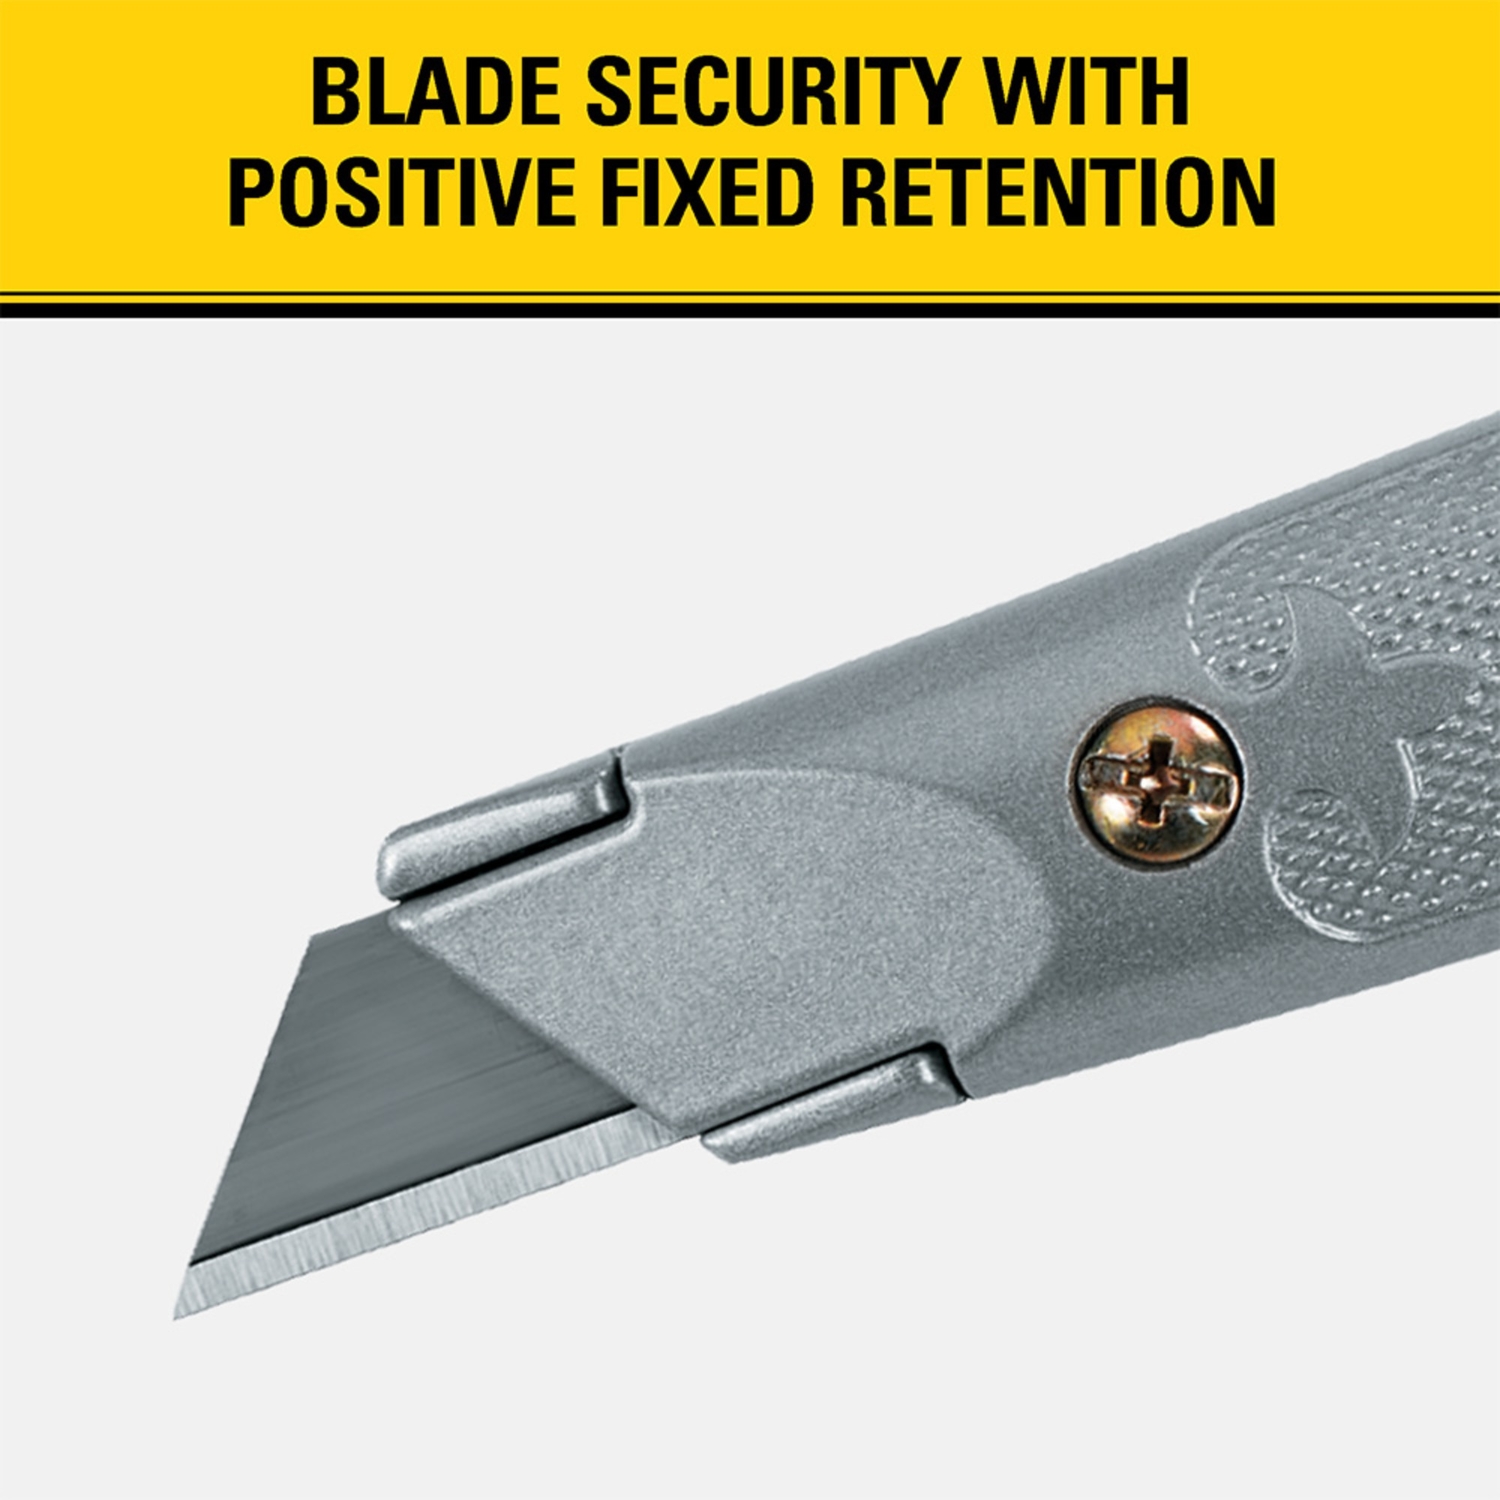 Stanley Classic 199 5-3/8 in. Fixed Blade Utility Knife Gray 1 pk